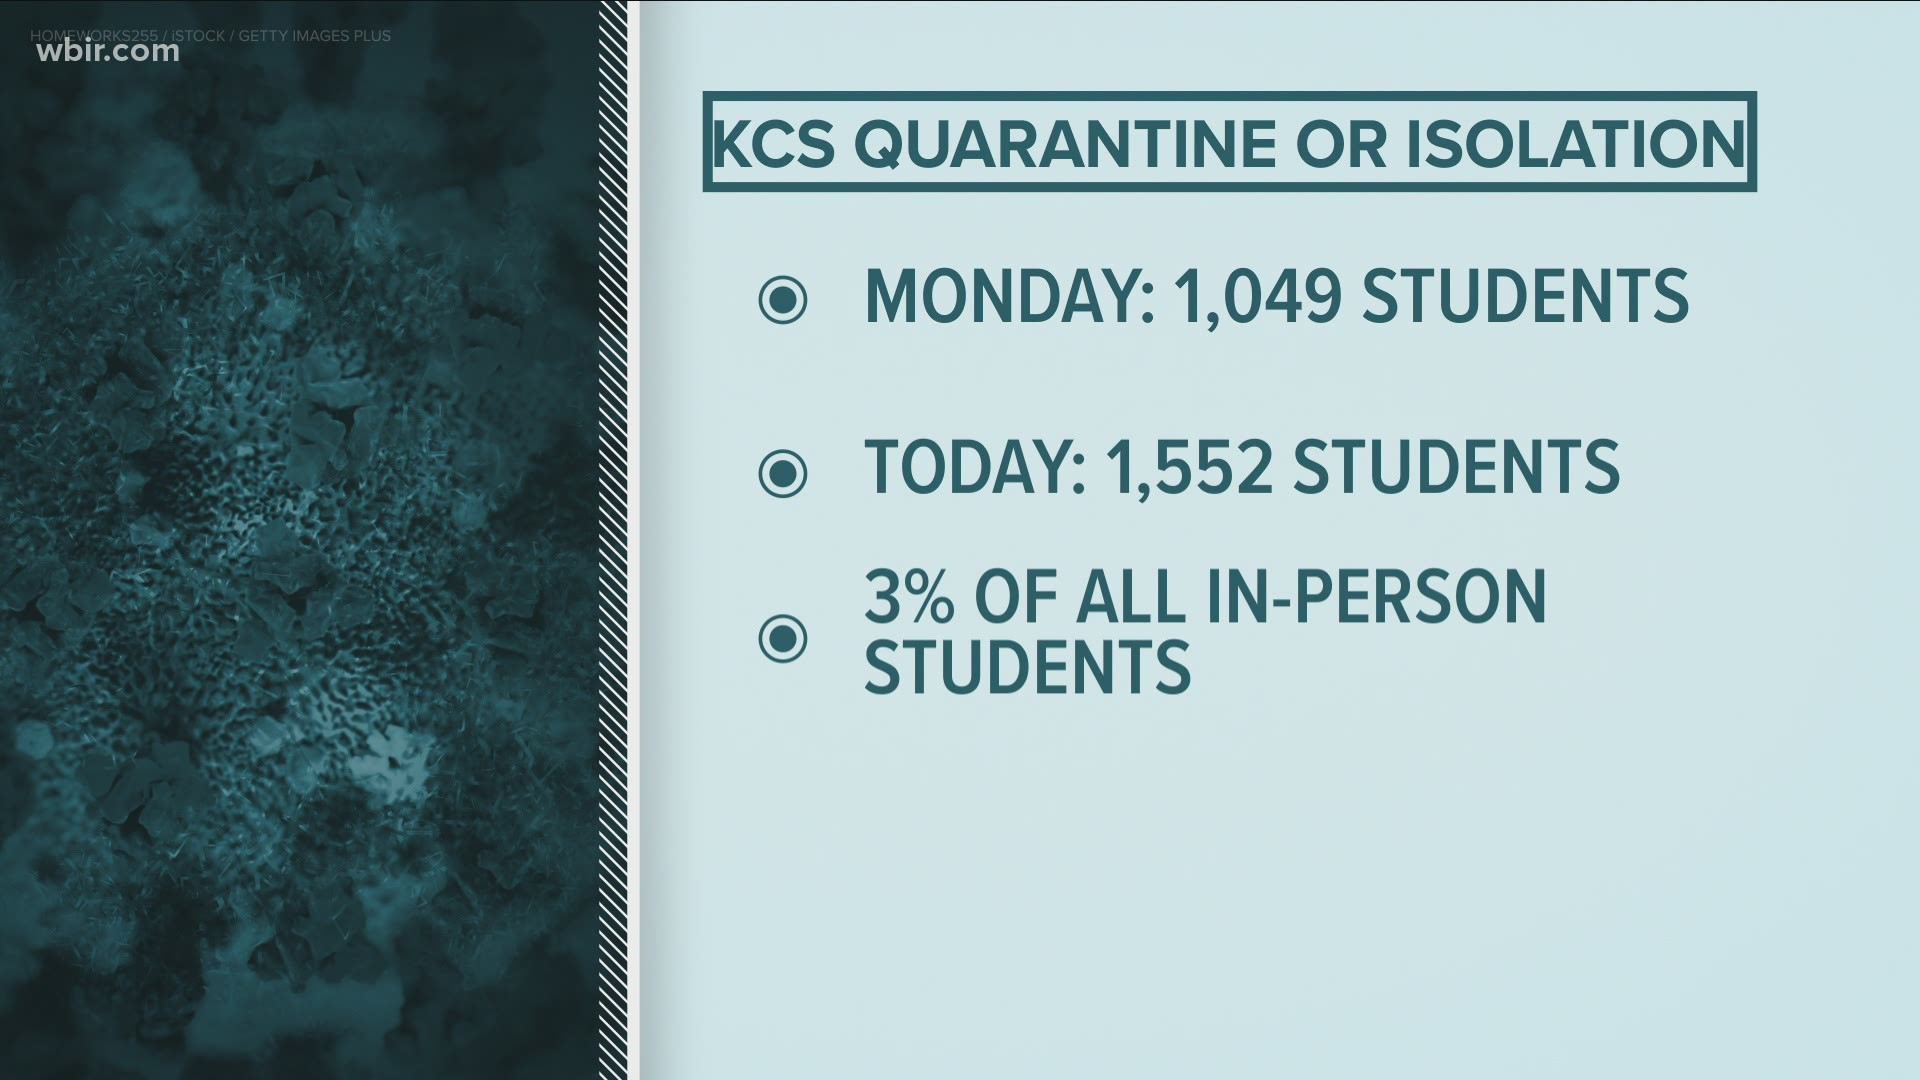 The number of students in Knox County under quarantine or isolation due to COVID-19 spiked by at least 500, to more than 1,552.